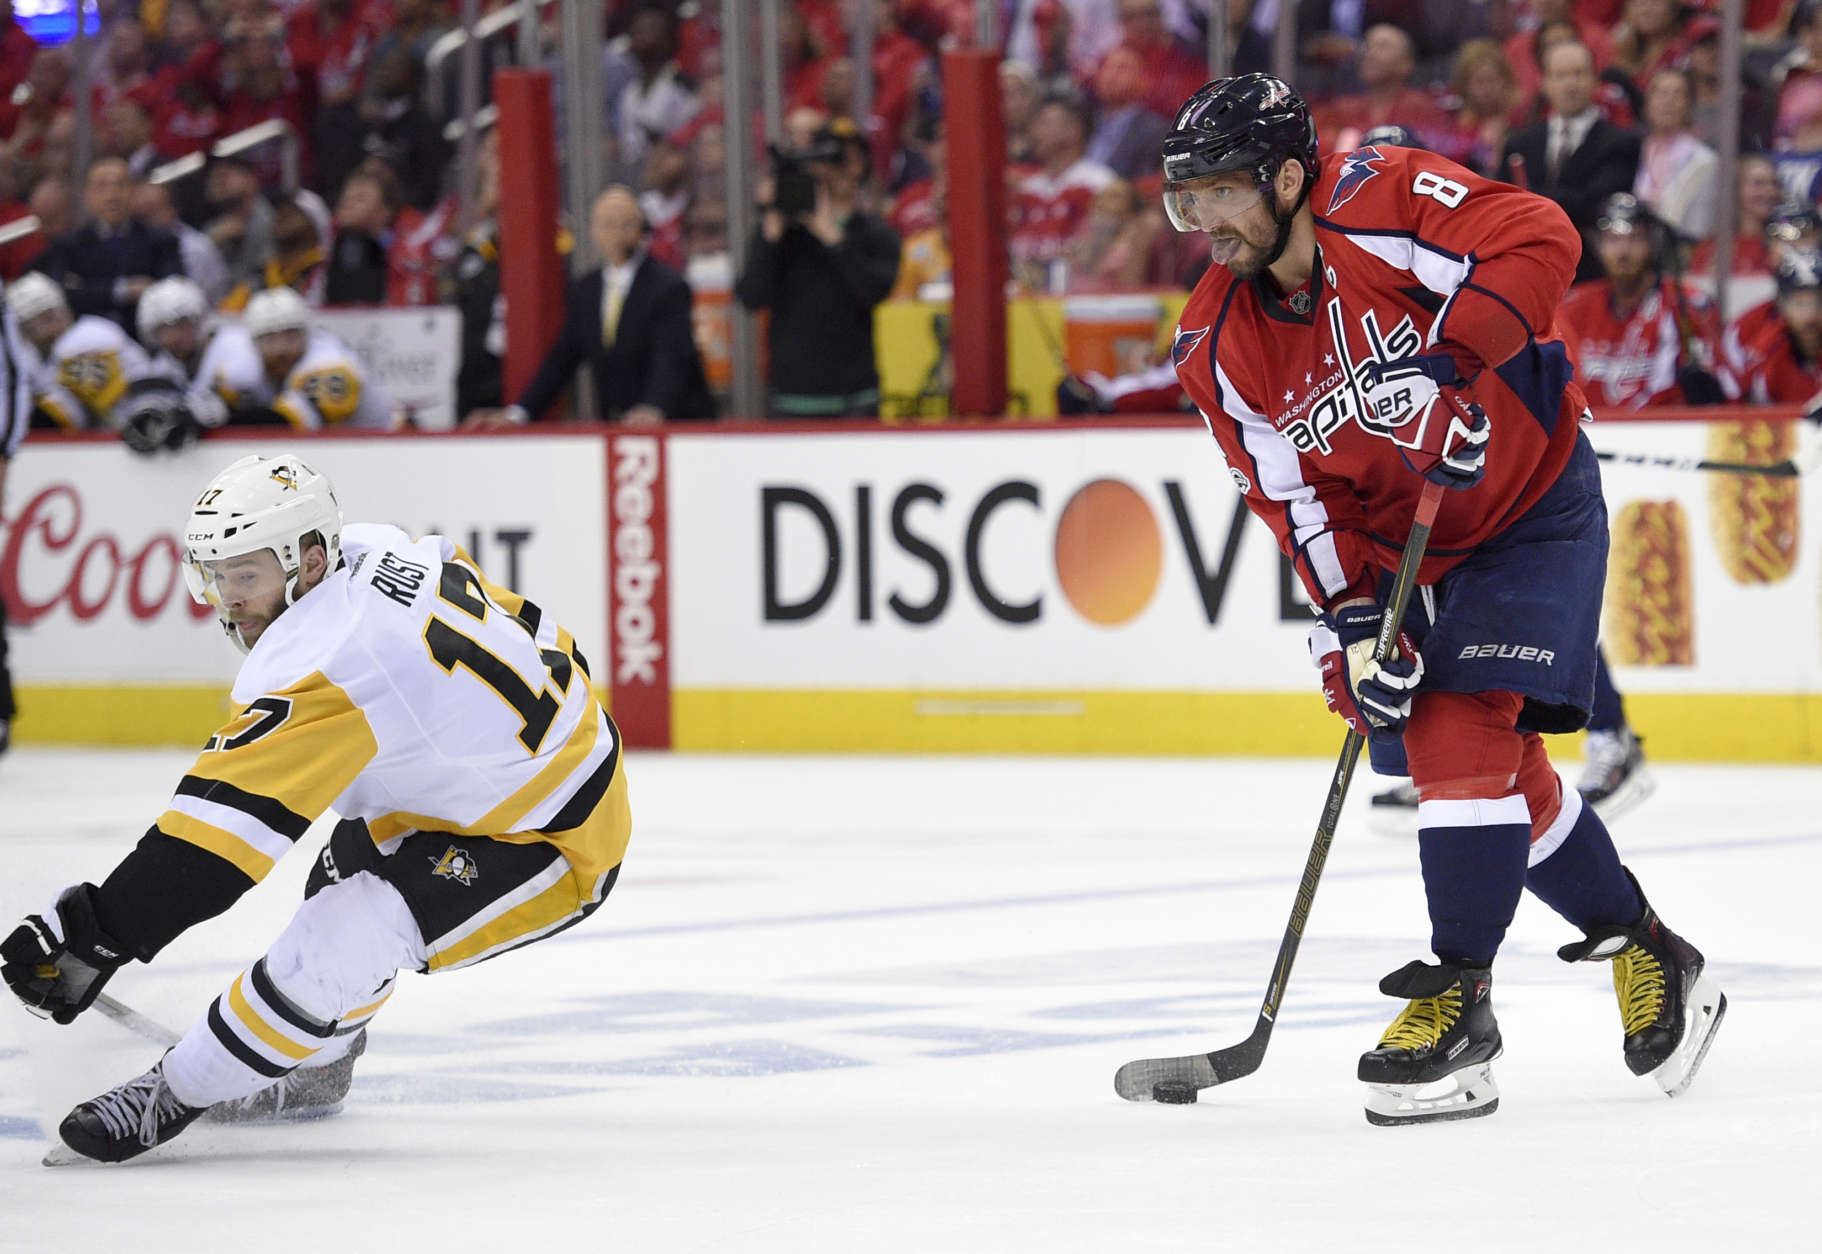 Washington Capitals left wing Alex Ovechkin (8), of Russia, skates with the puck against Pittsburgh Penguins right wing Bryan Rust (17) during the second period of Game 1 in an NHL hockey Stanley Cup second-round playoff series, Thursday, April 27, 2017, in Washington. (AP Photo/Nick Wass)